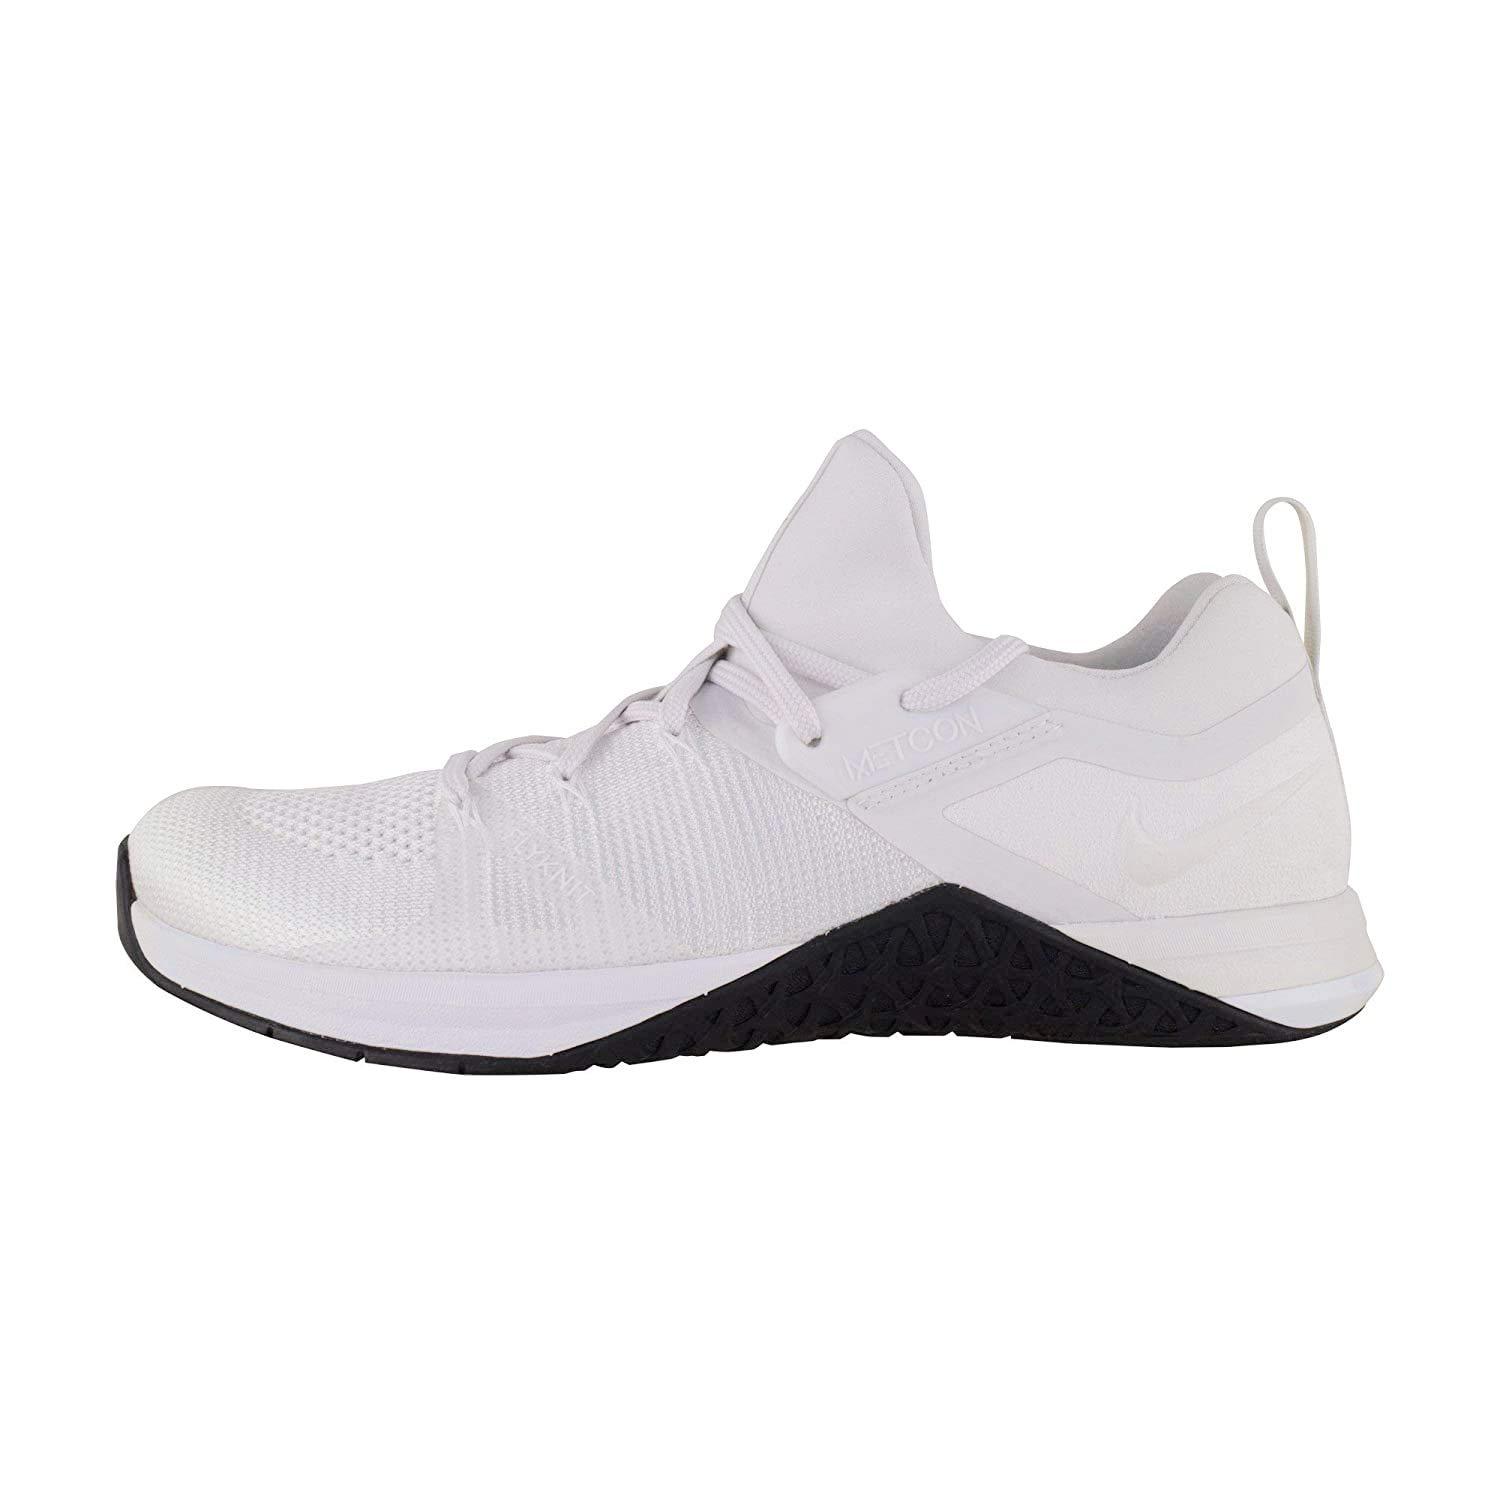 Nike Metcon Flyknit 3 Fitness Shoes in White for Men - Save 20% - Lyst